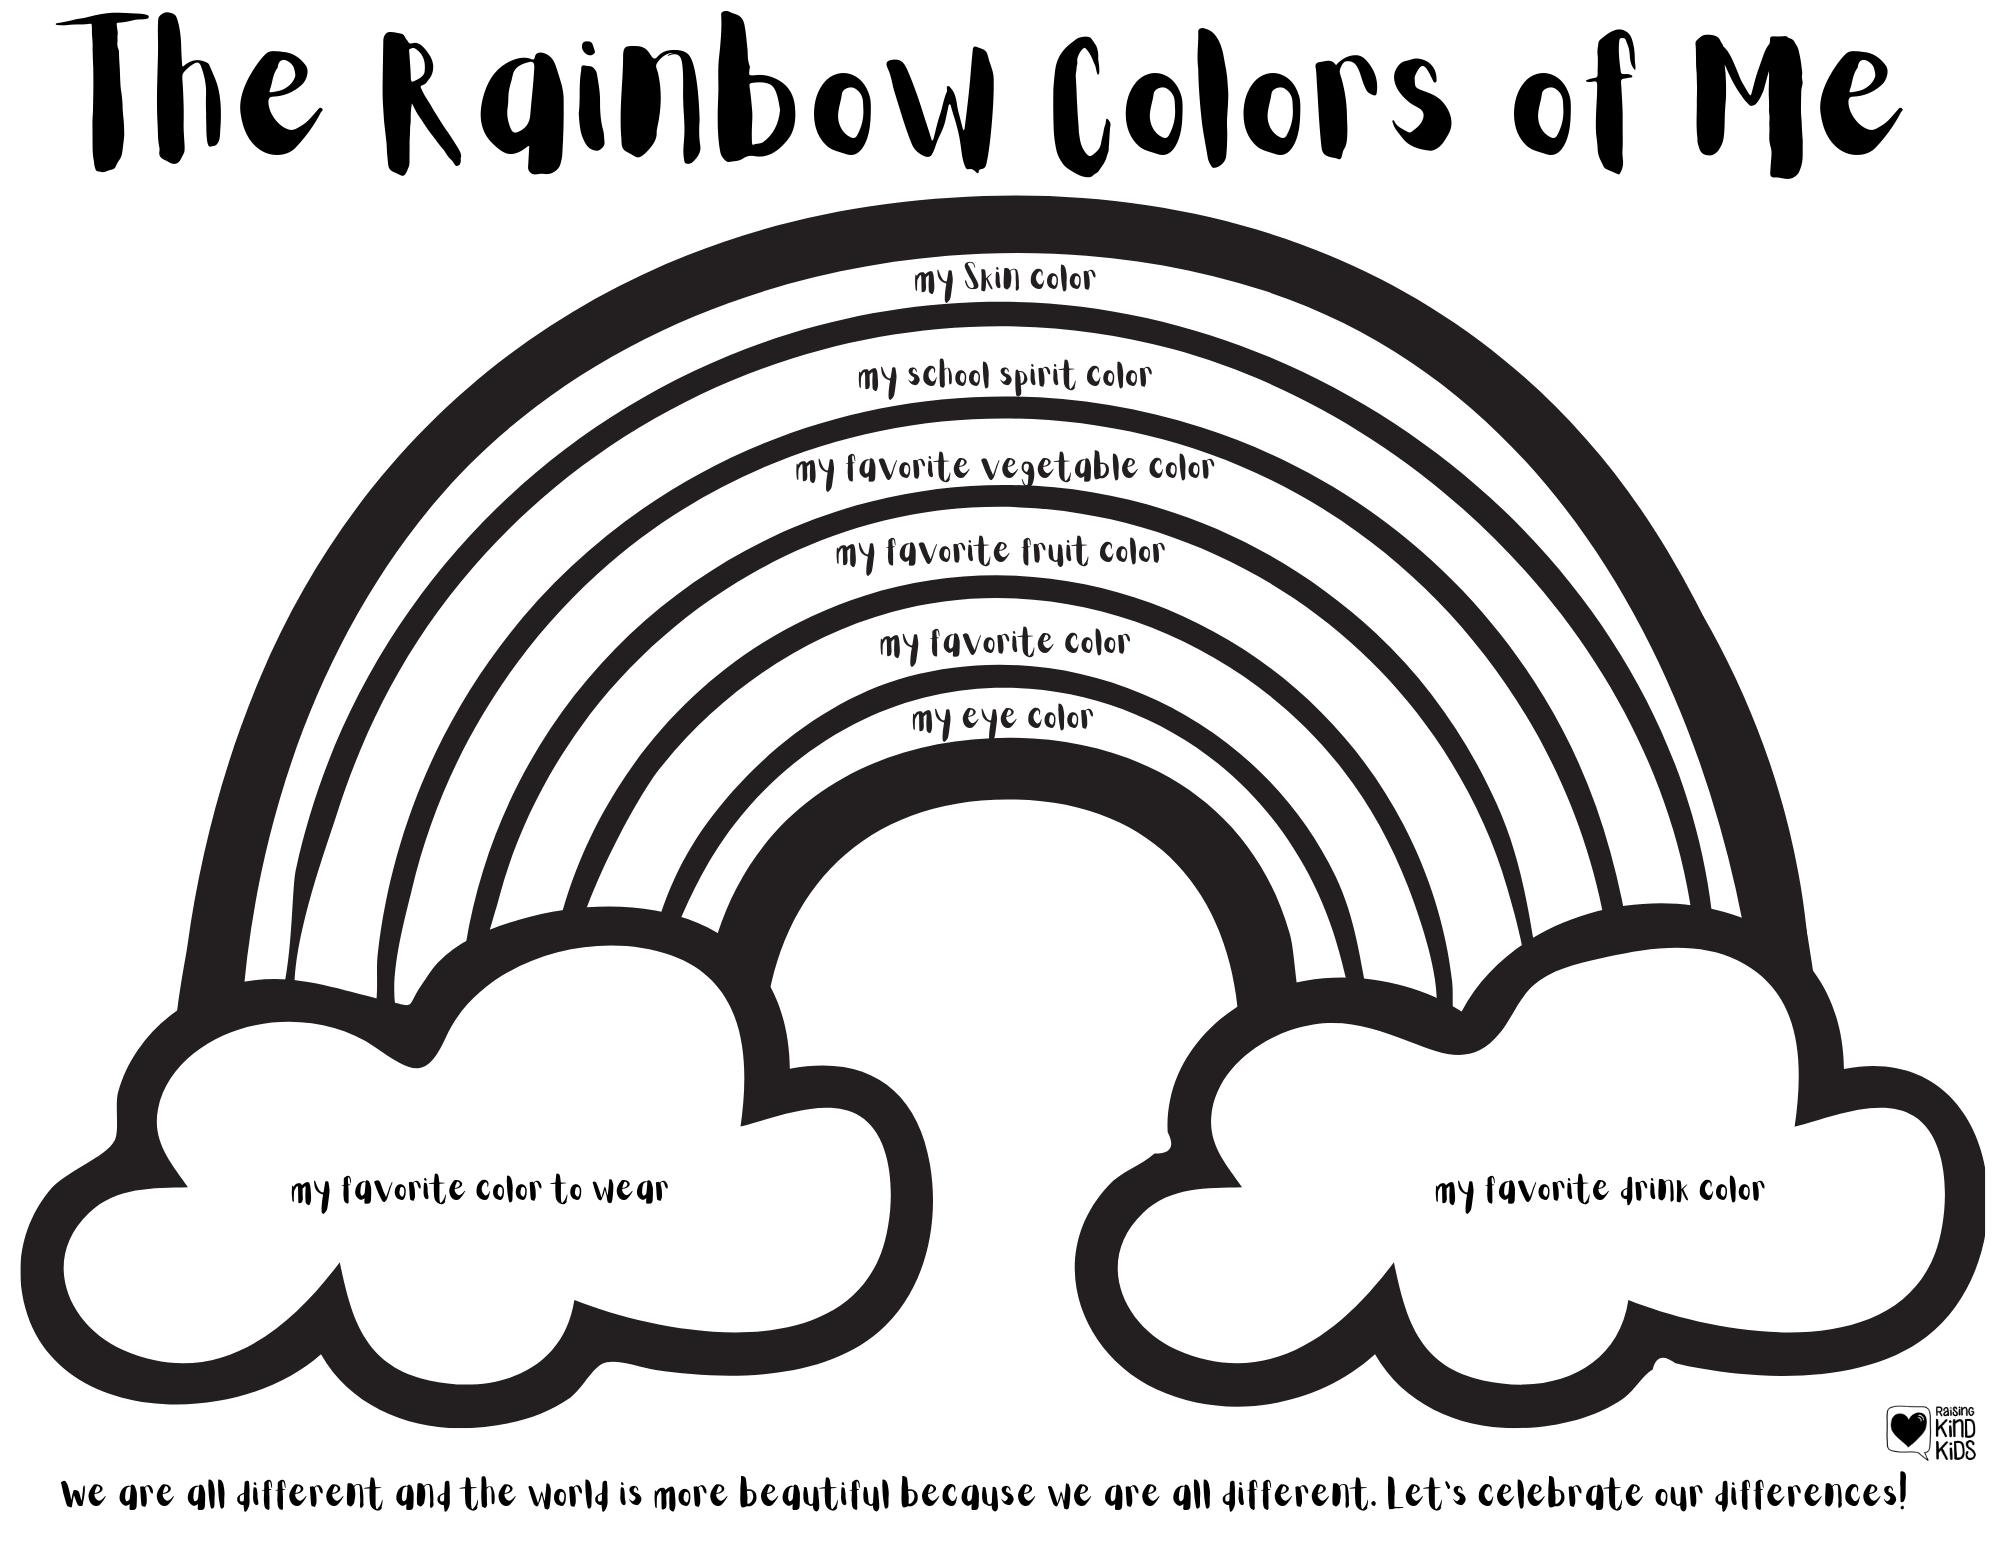 The Rainbow Colors of Me is a great way to celebrate and showcase our differences and diversity.